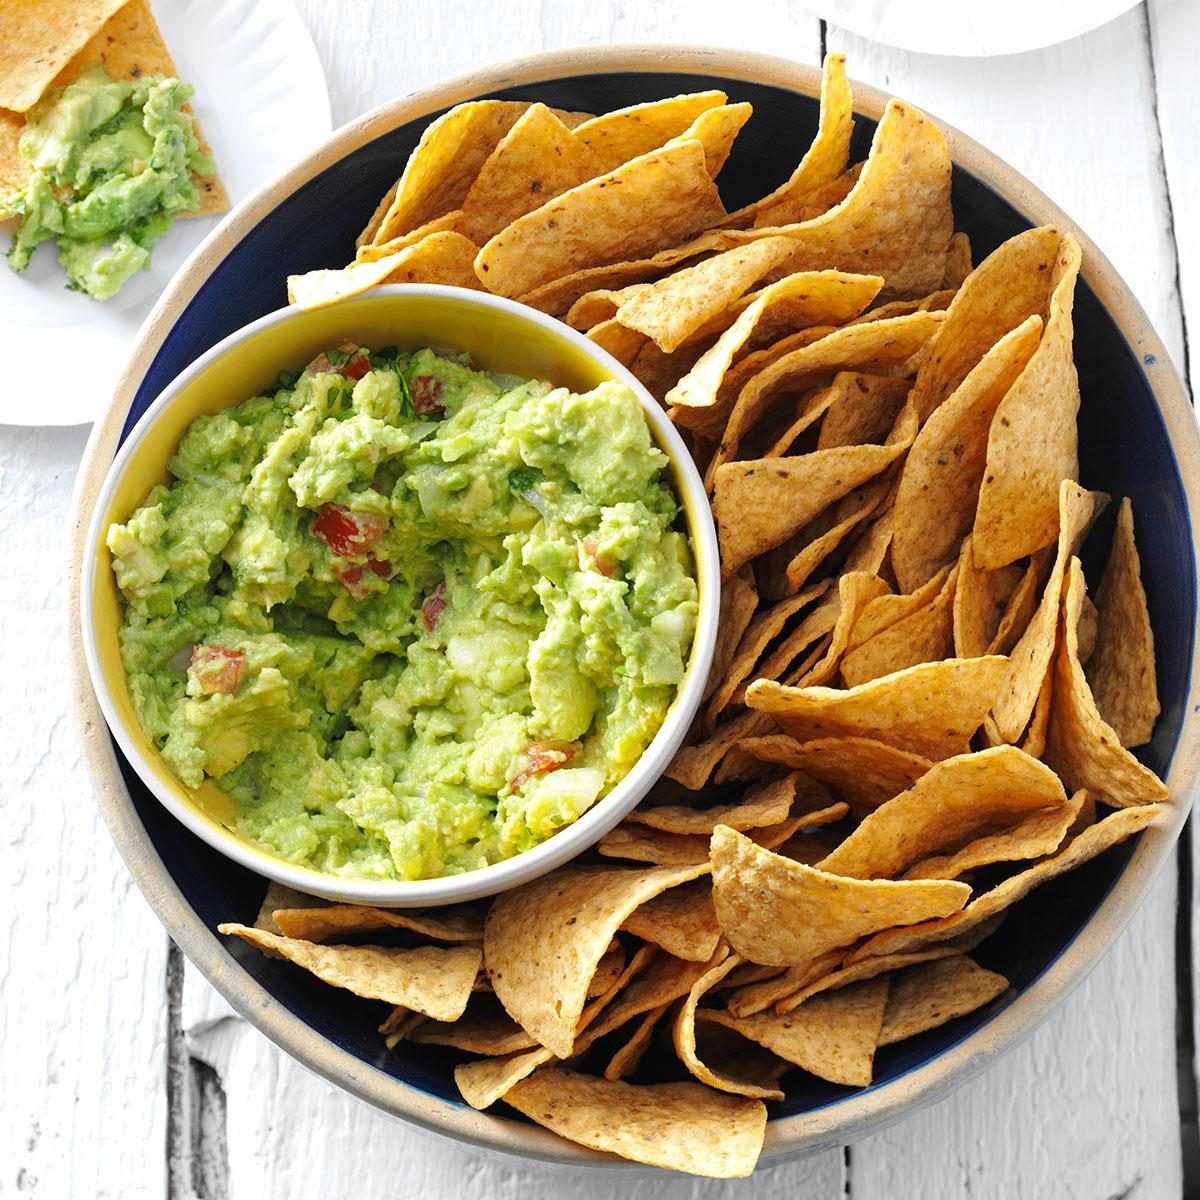 <p>Get the scoop on making a standout guacamole. A handful of chopped celery adds some fun crunch in this avocado dip—everyone’s favorite fiesta starter. —Catherine Cassidy, Milwaukee, Wisconsin </p> <div class="listicle-page__buttons"> <div class="listicle-page__cta-button"><a href='https://www.tasteofhome.com/recipes/catherine-s-guacamole/'>Get Recipe</a></div> </div>